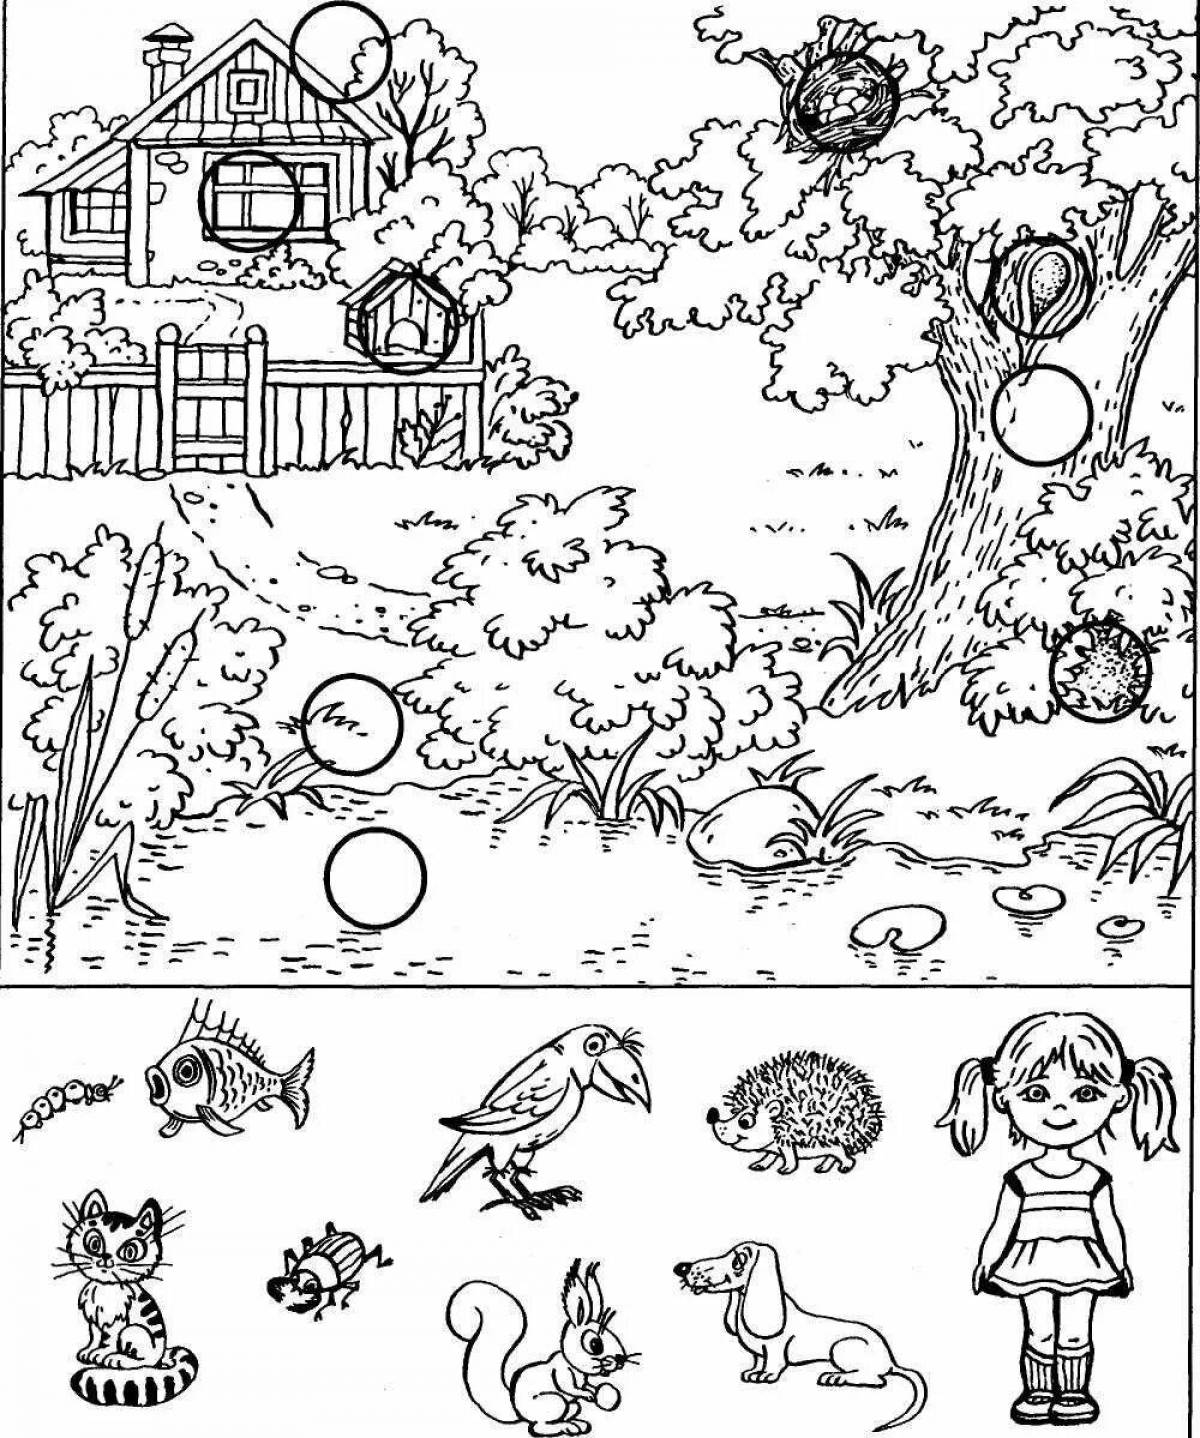 Entertaining coloring book who lives where